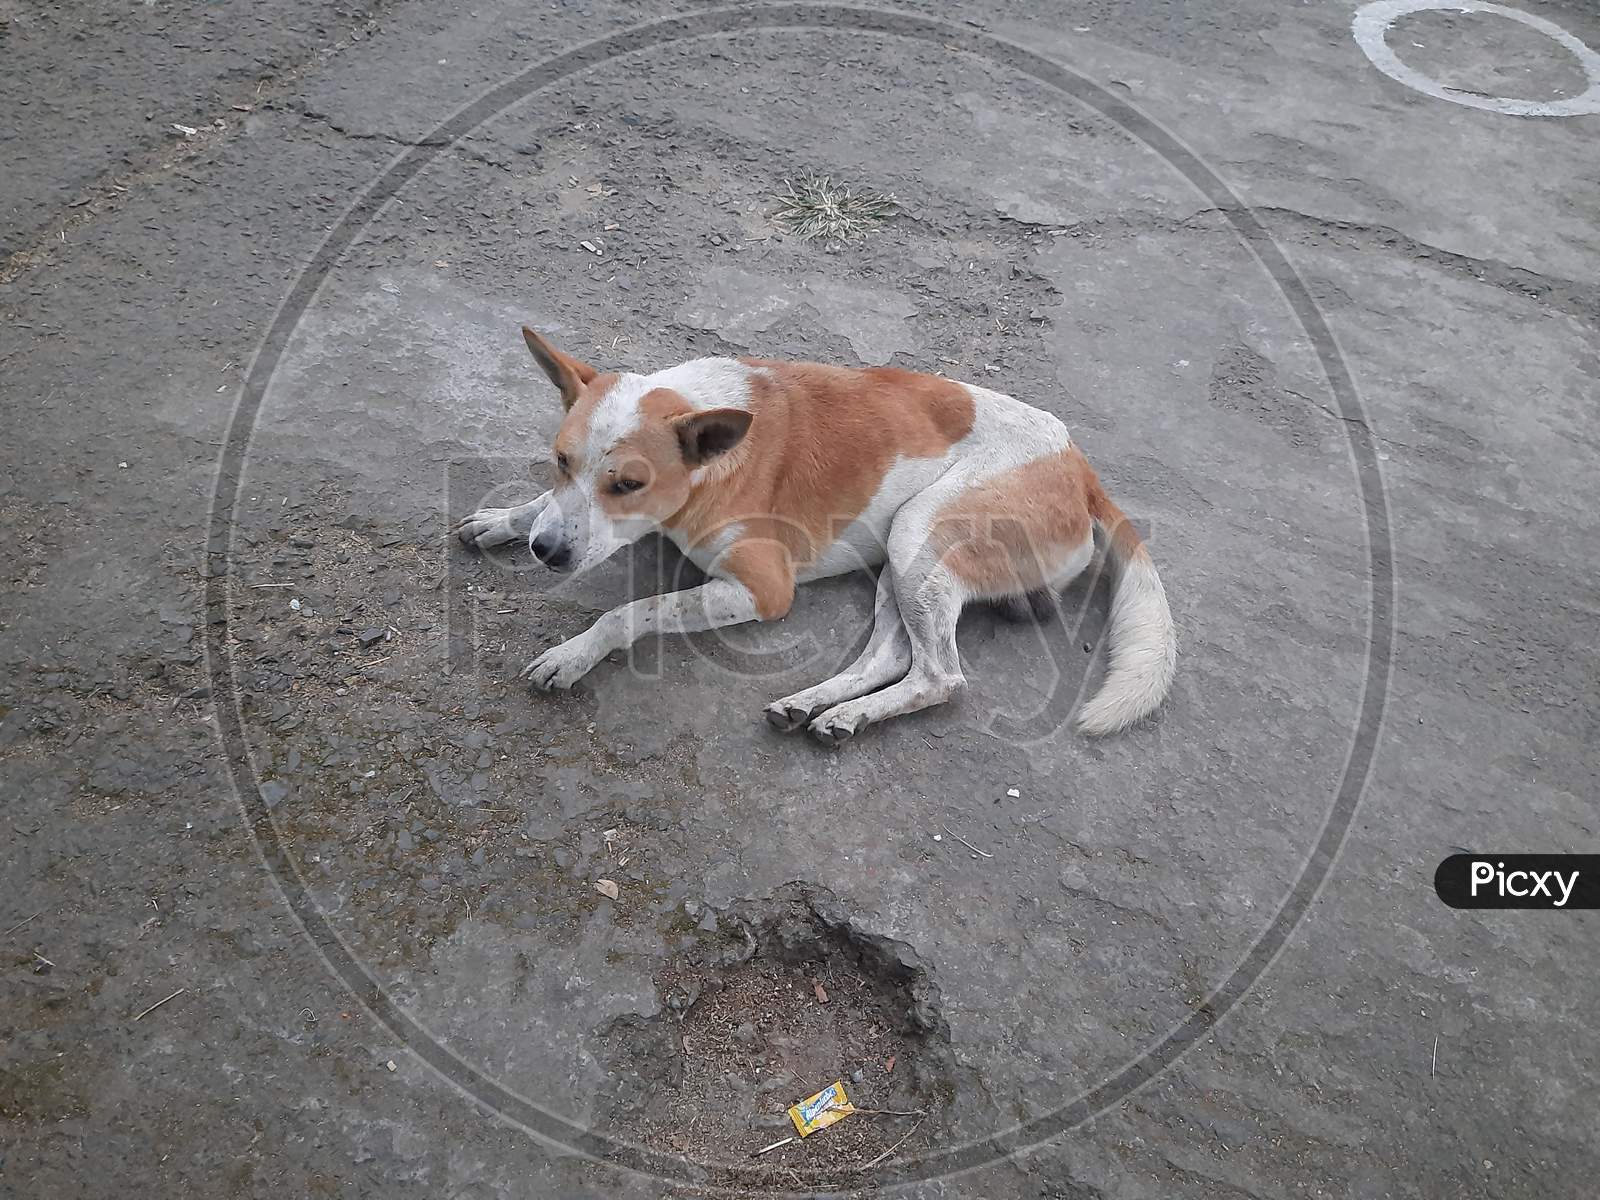 Red Dog image  in the Road, dog iimage, Selective Focus, Background Blur